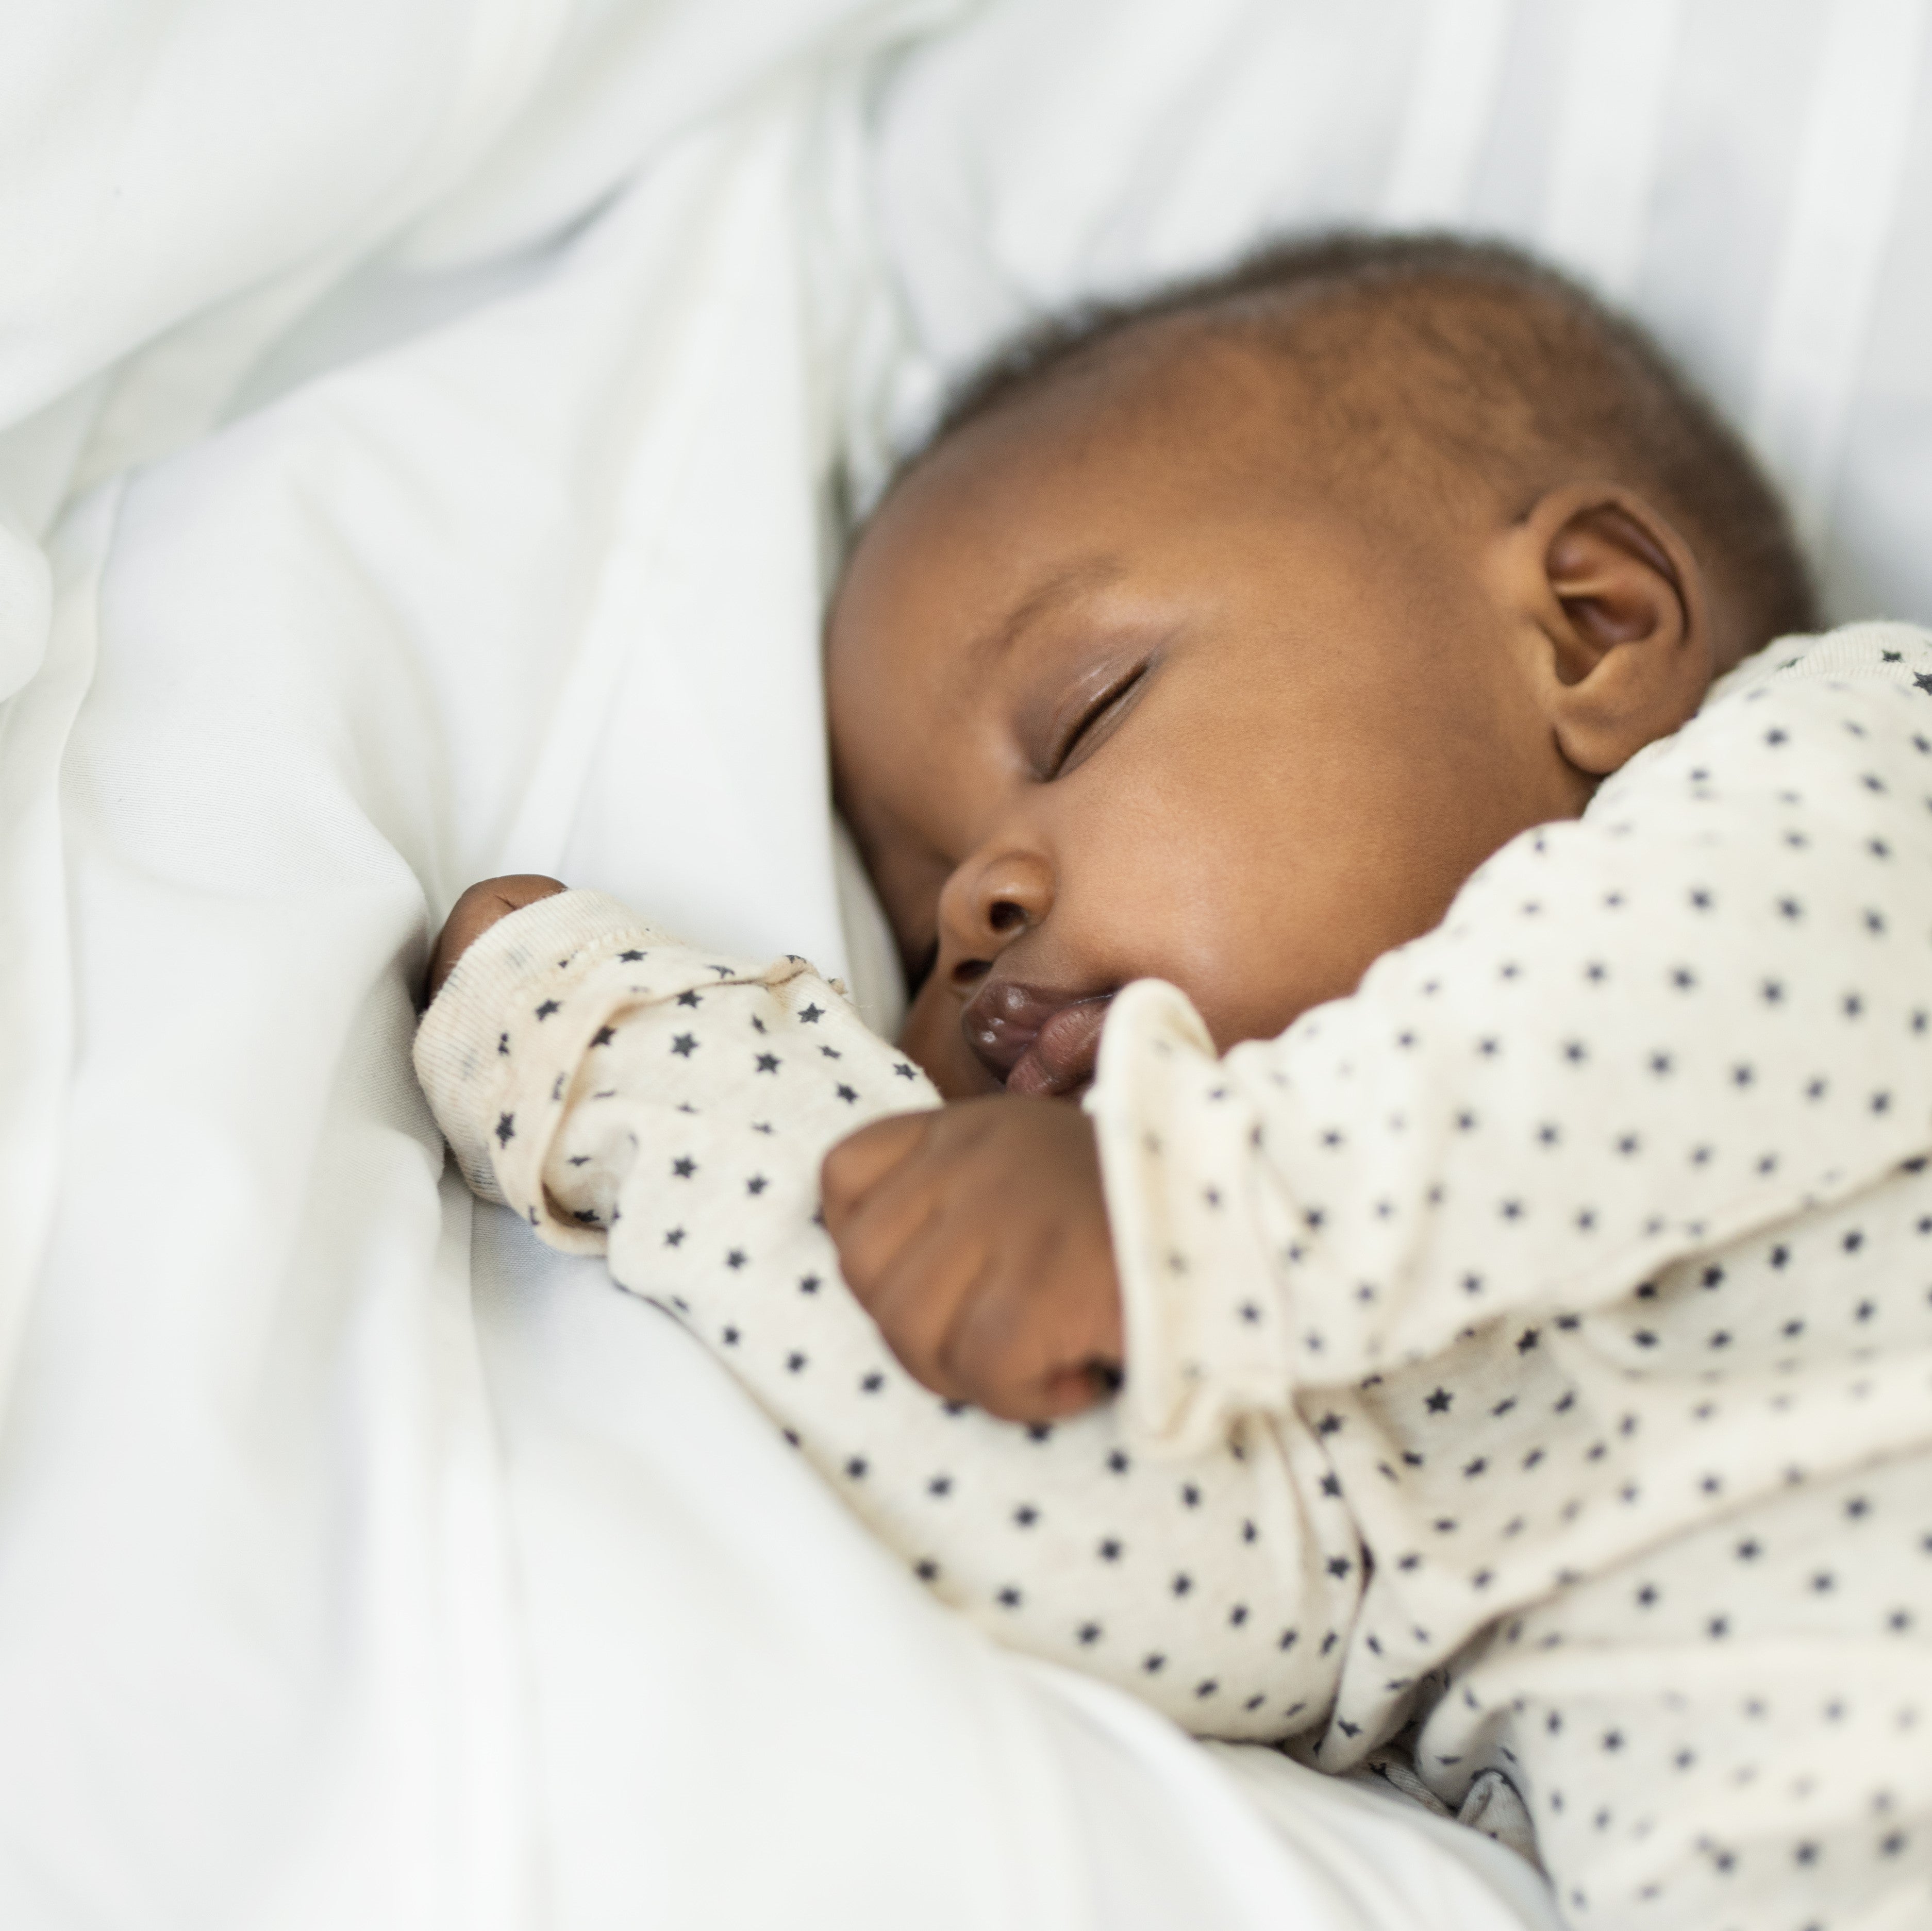 Baby Sleep – What’s Normal?